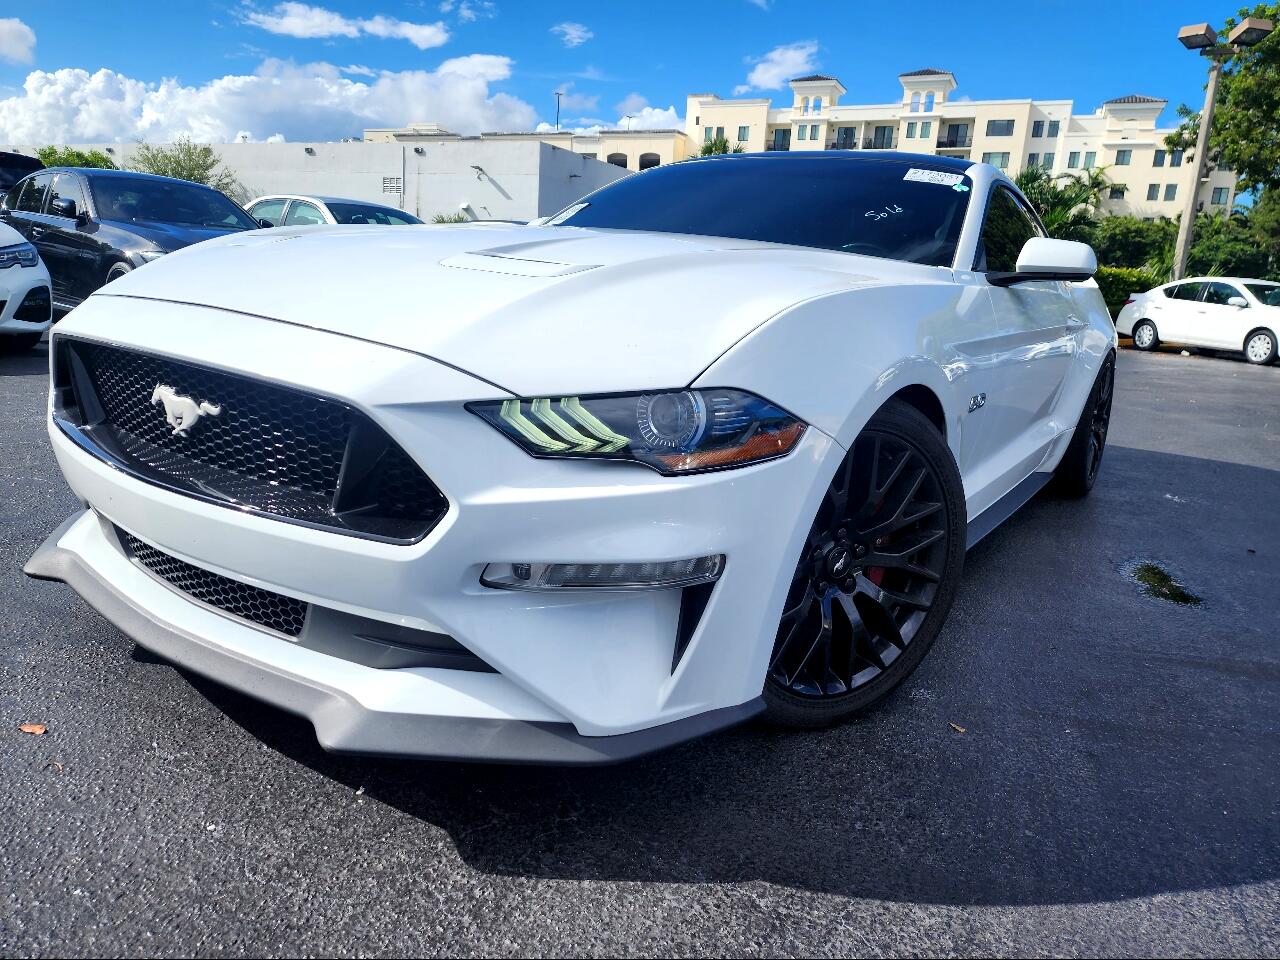 2019 FORD Mustang Coupe - $31,999